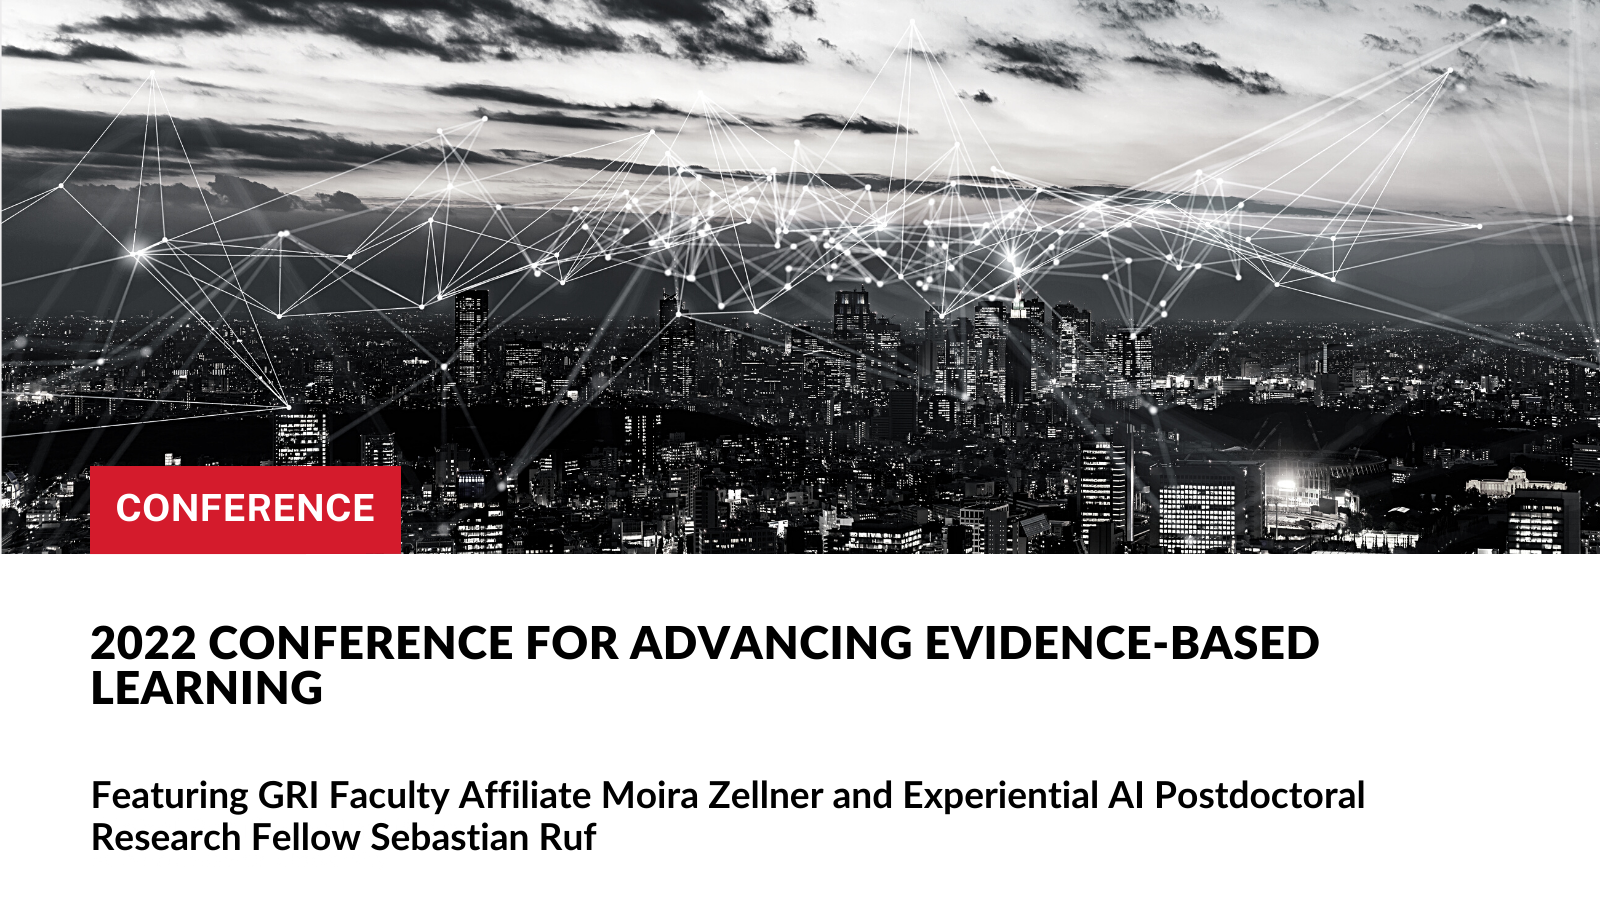 2022 Conference for Advancing Evidence-Based Learning